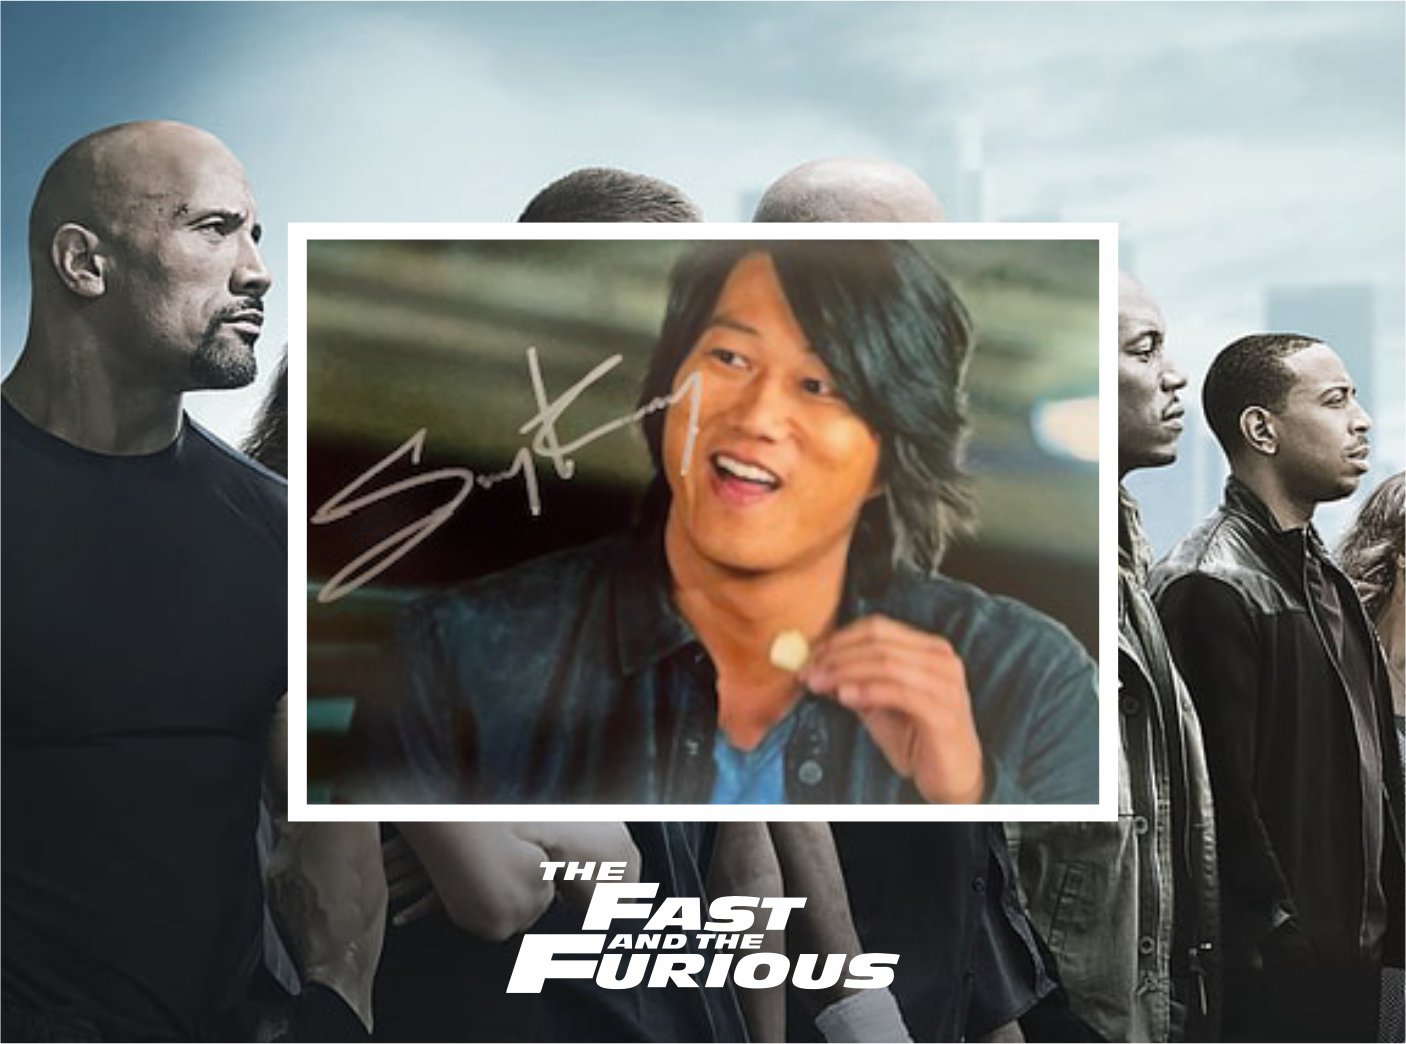 Sung Kang Fast and Furious 5 x 7 photo signed